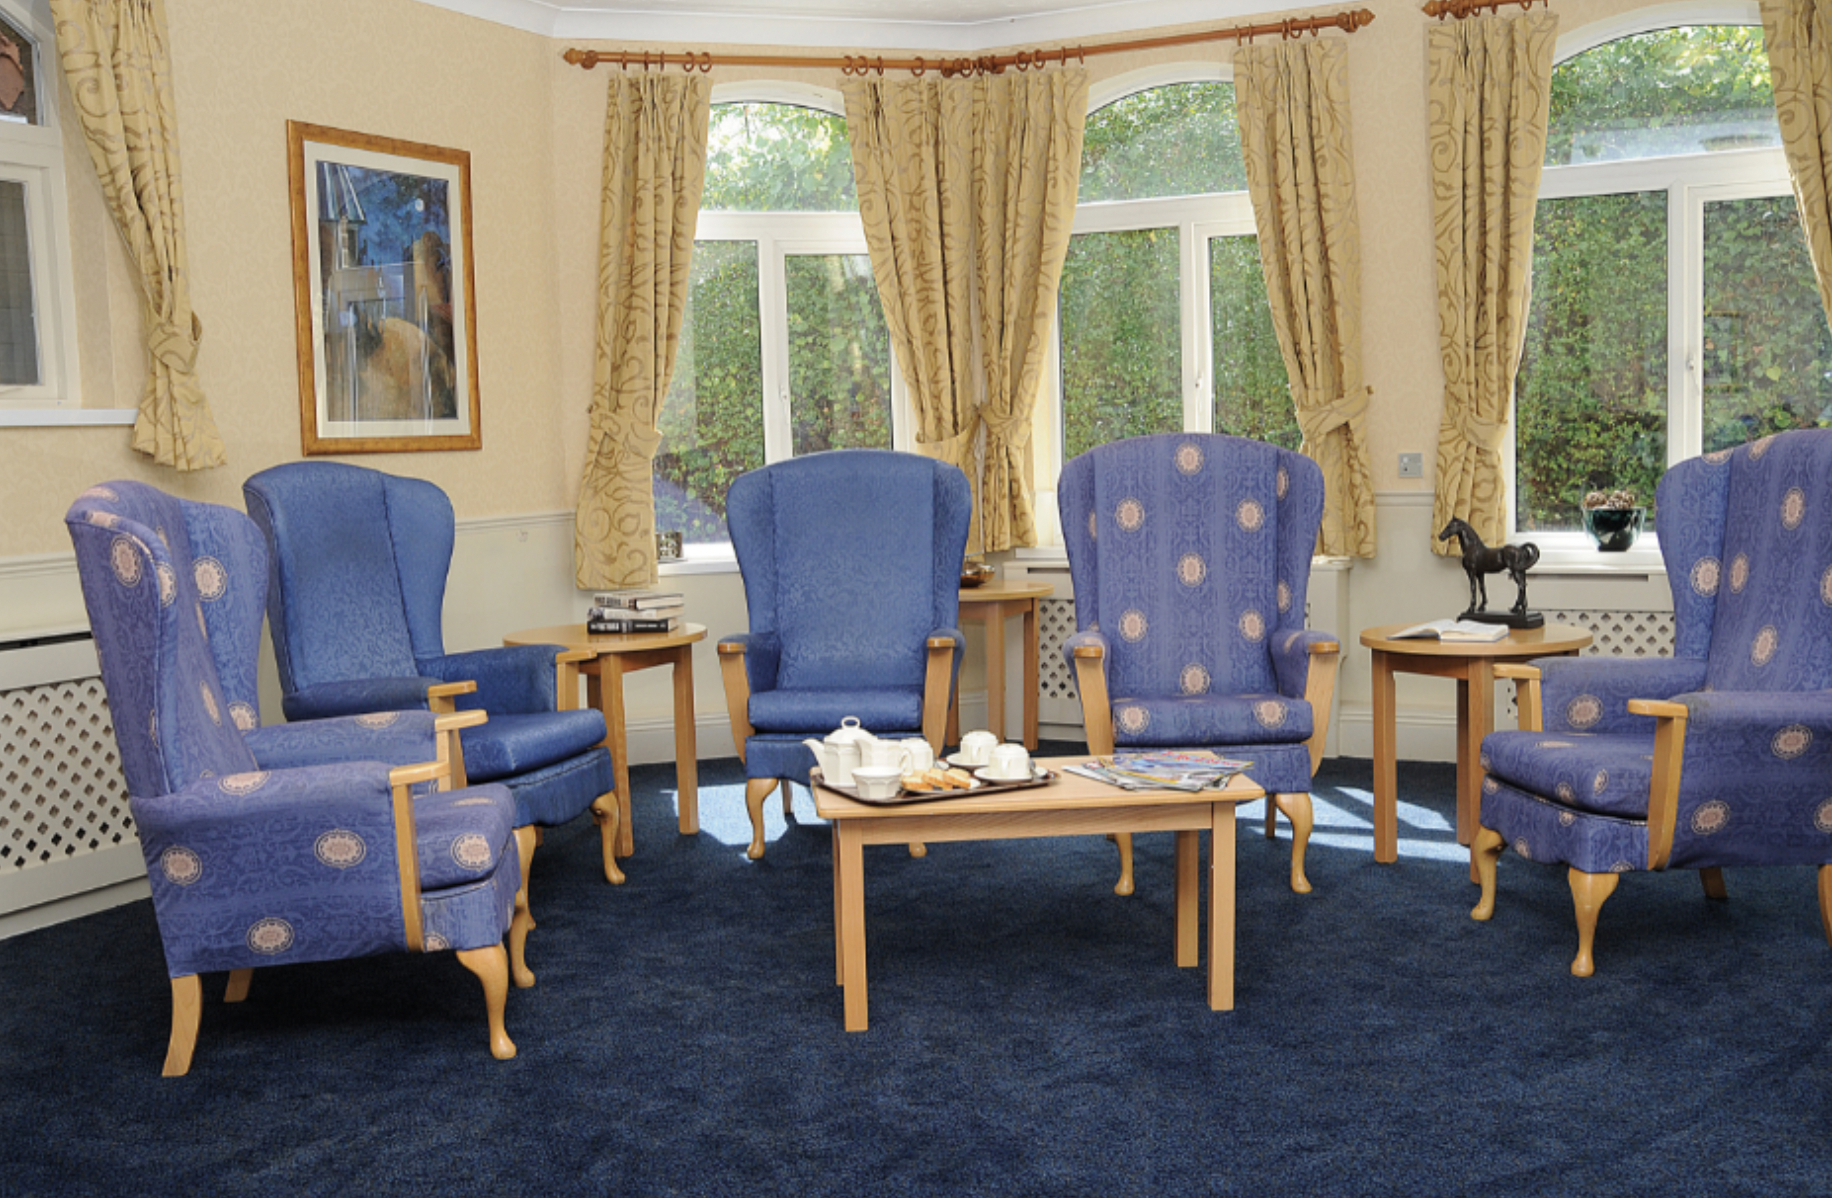 Lounge of Lynton Hall care home in New Malden, London